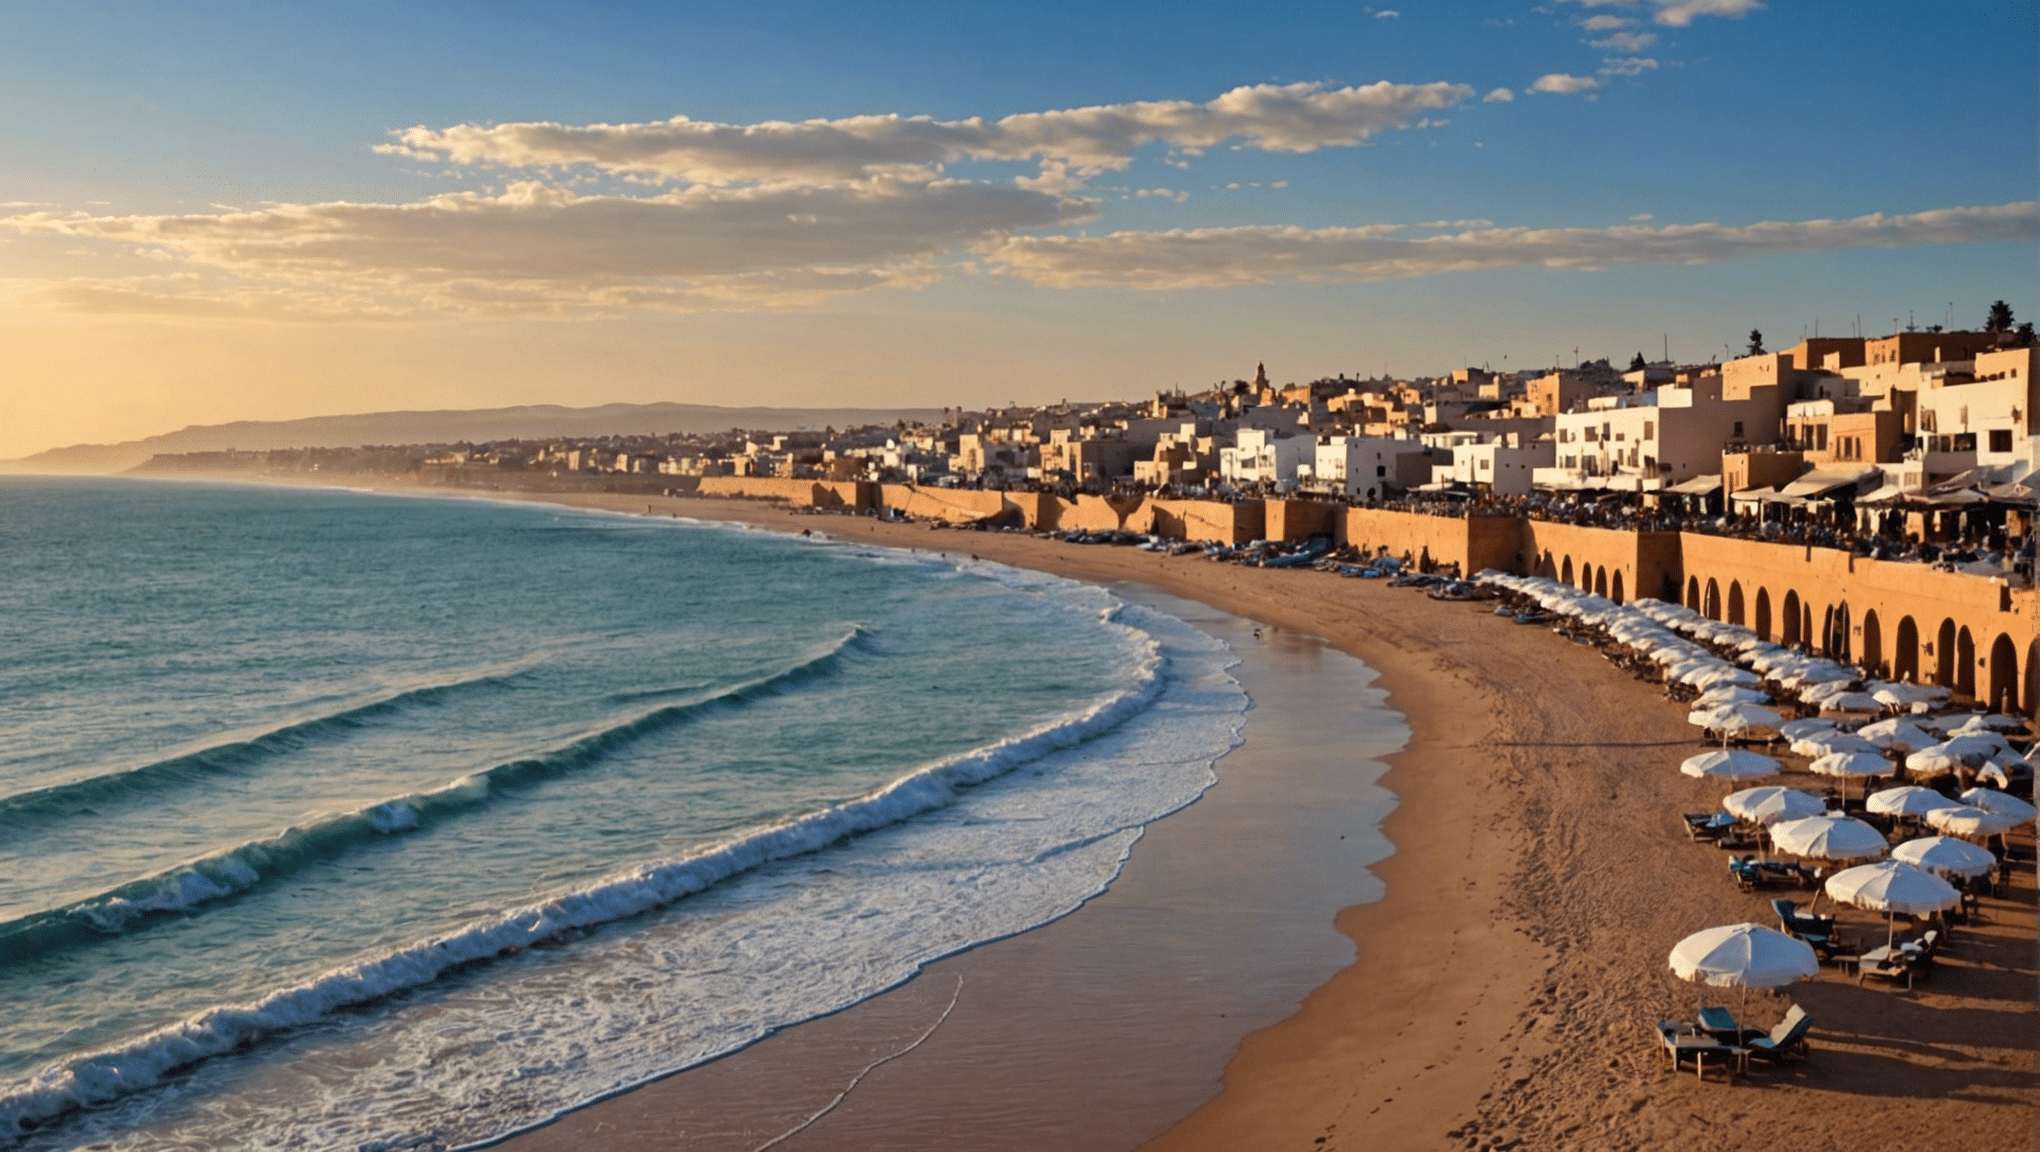 discover what the weather is like in taghazout in march with our comprehensive guide. plan your trip and make the most of your visit with our detailed insights.